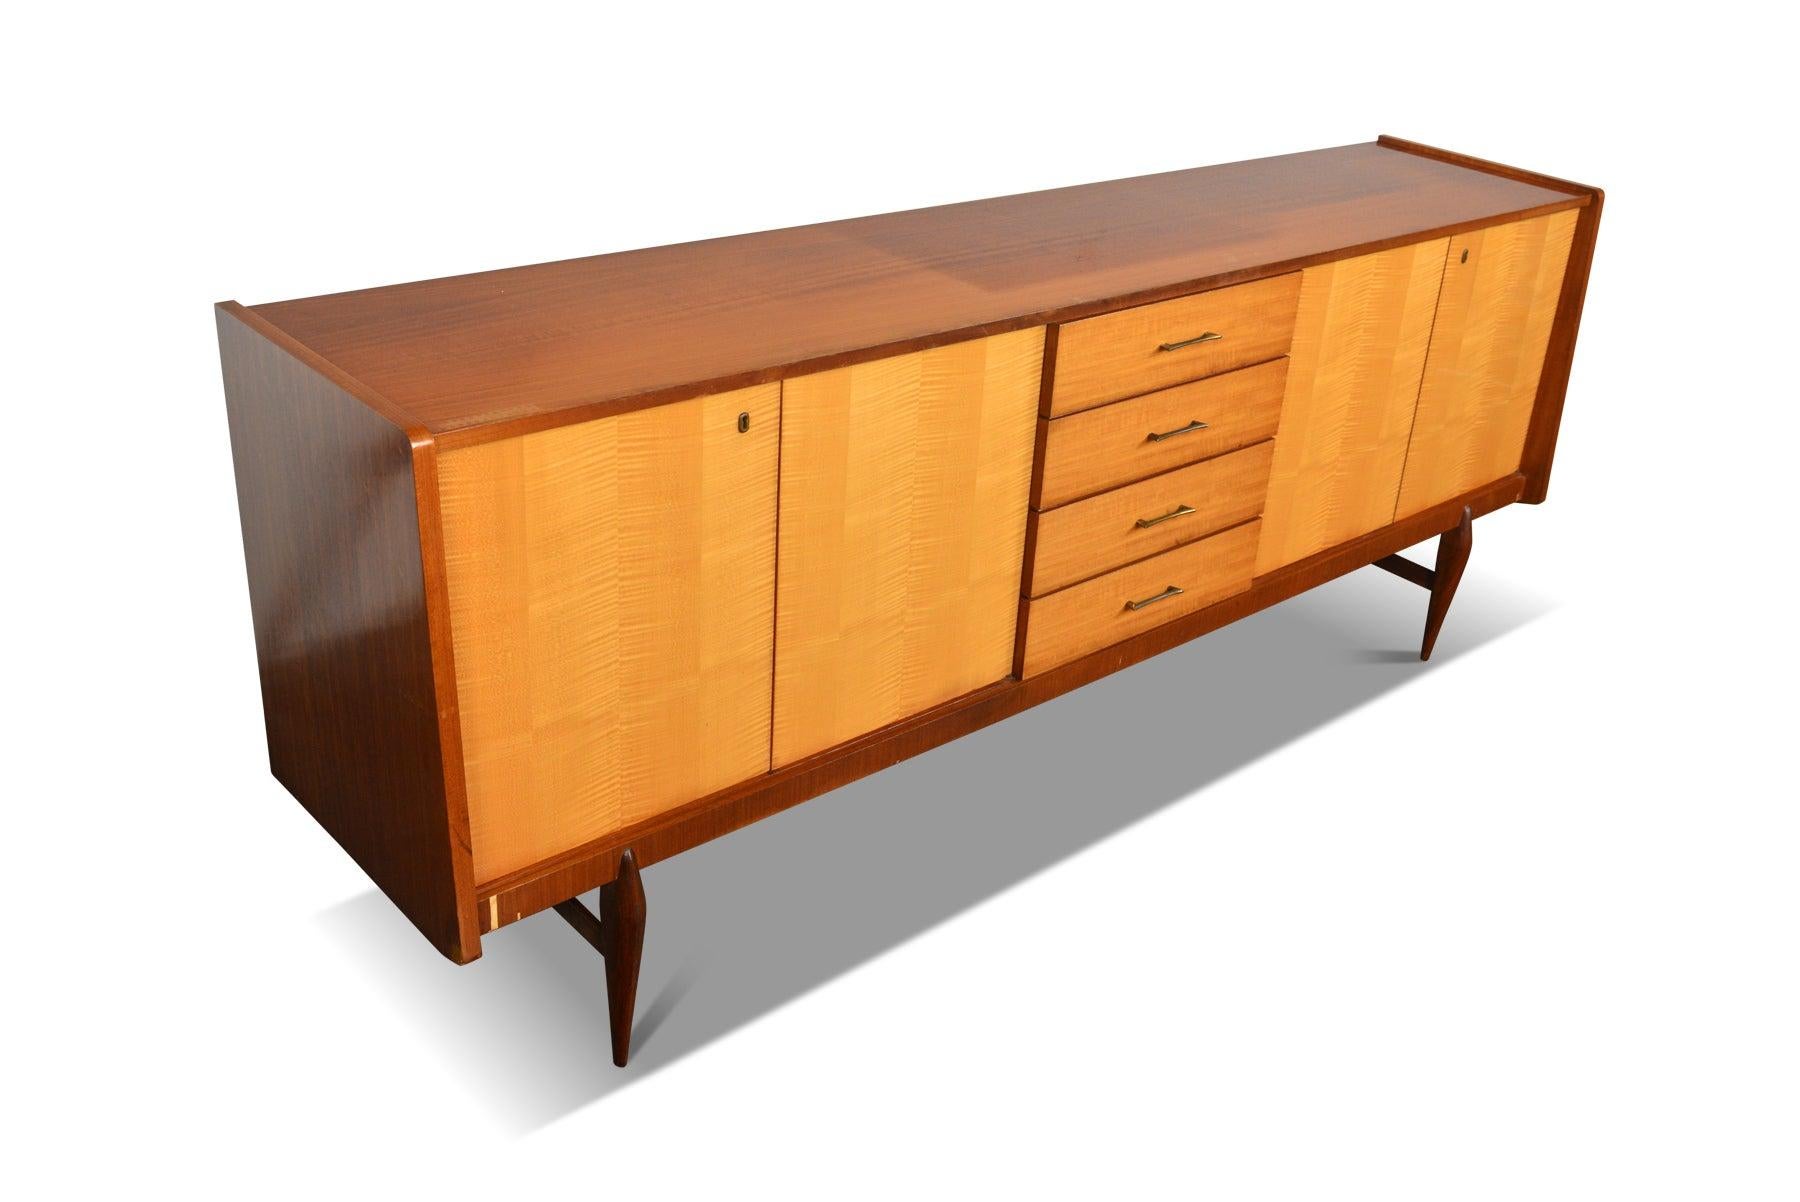 French, Modern Low Sideboard in Beech and Maple In Excellent Condition For Sale In Berkeley, CA